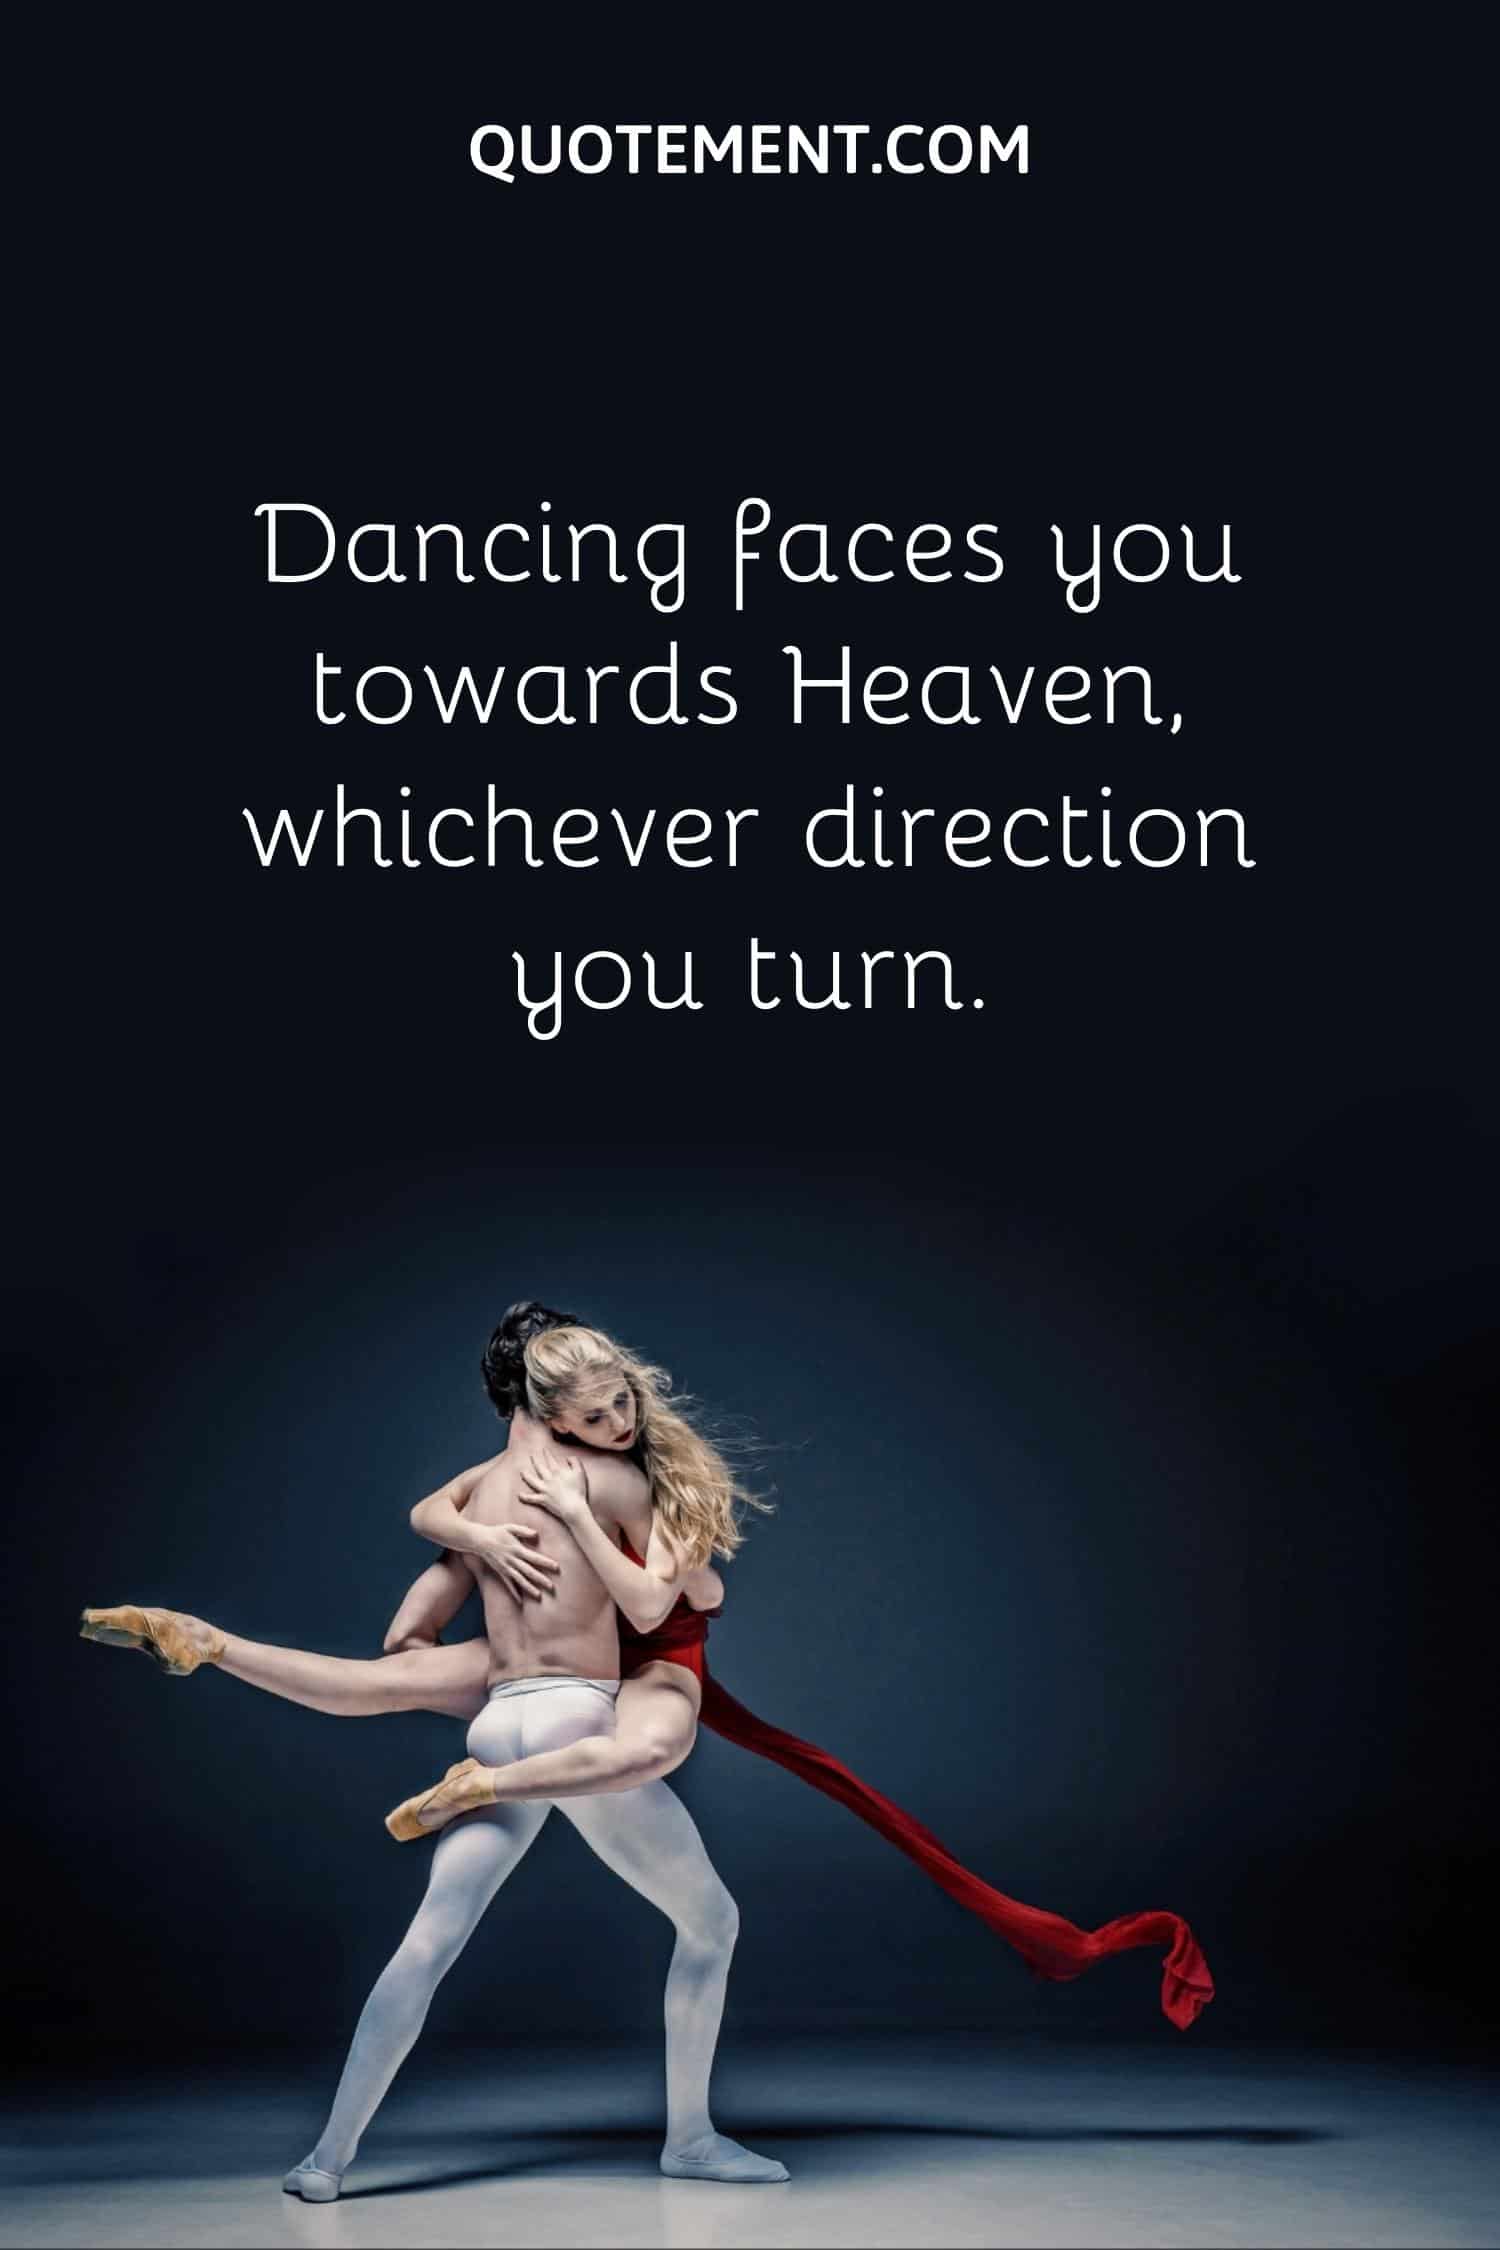 Dancing faces you towards Heaven, whichever direction you turn